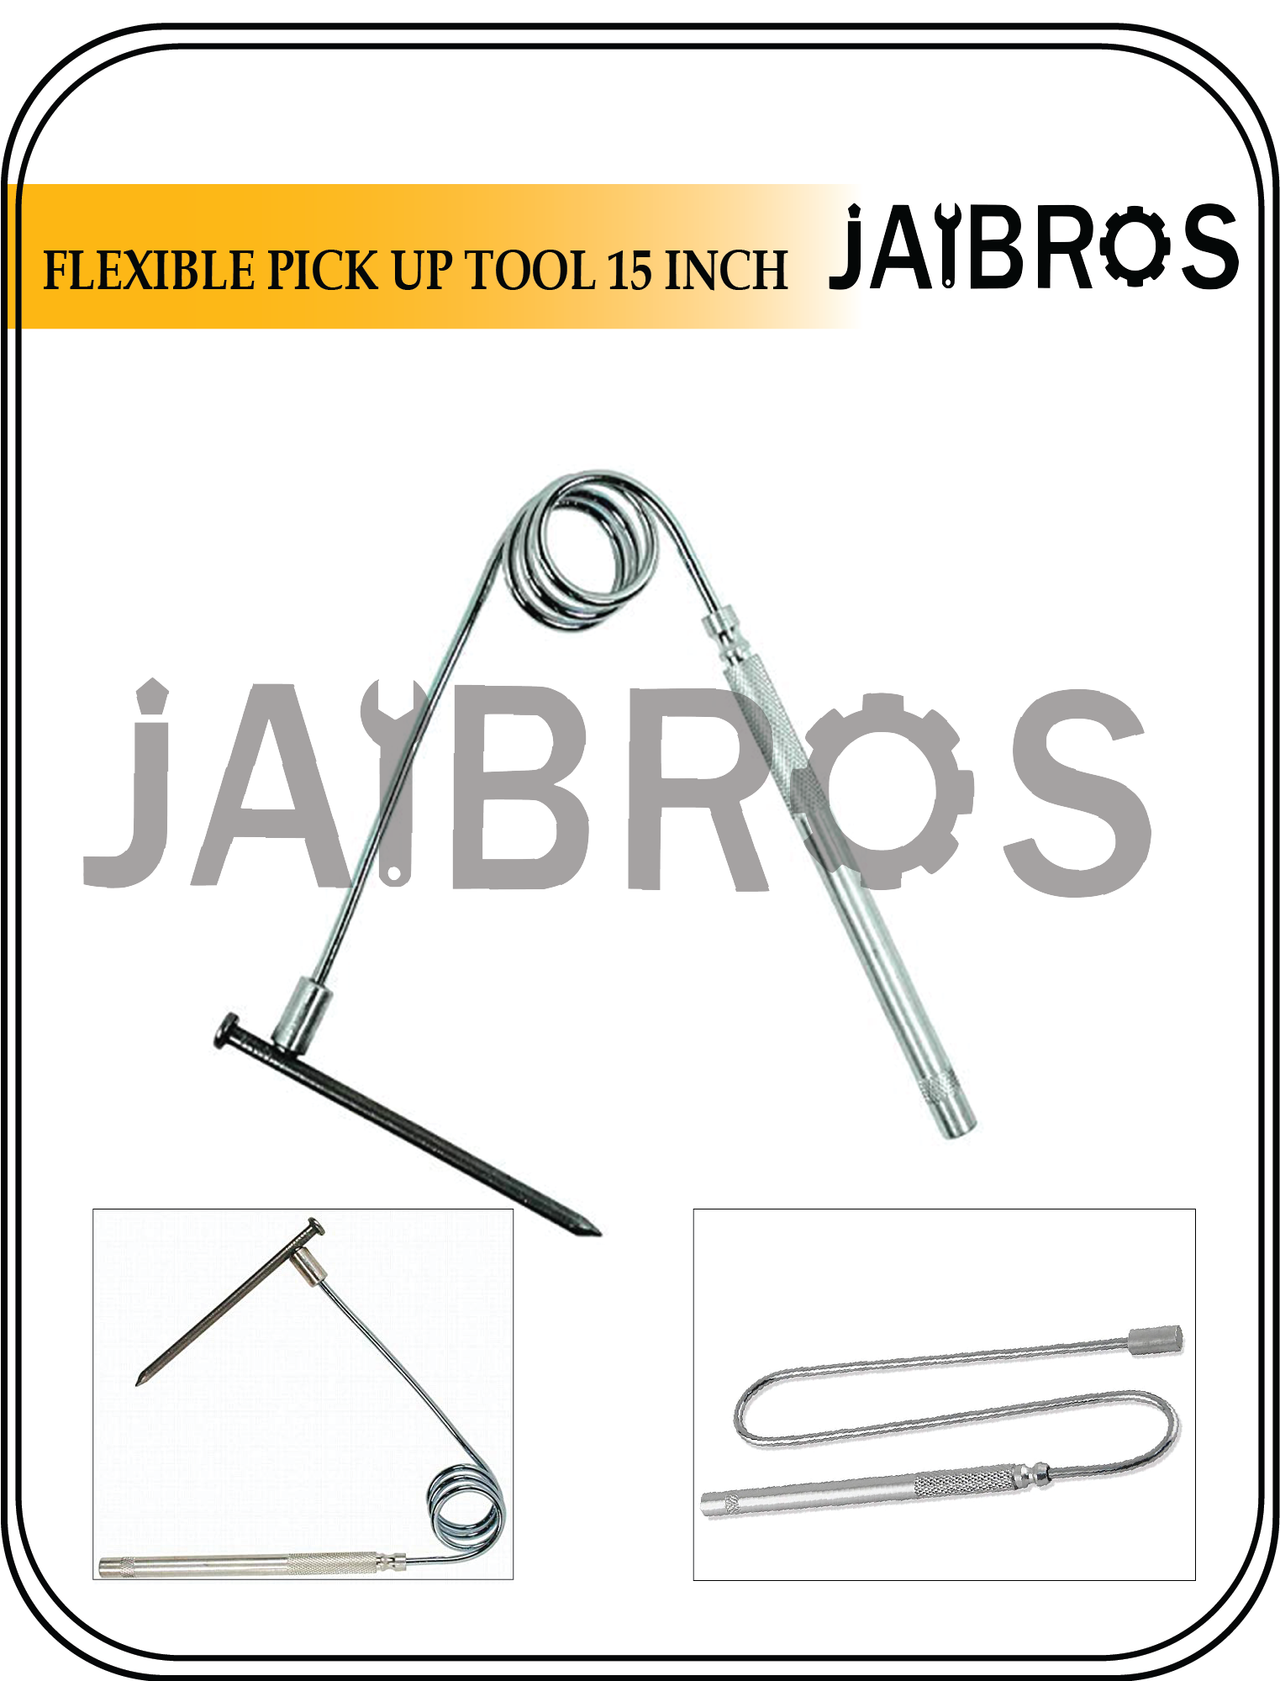 Flexible Pick Up Tool 15 Inch